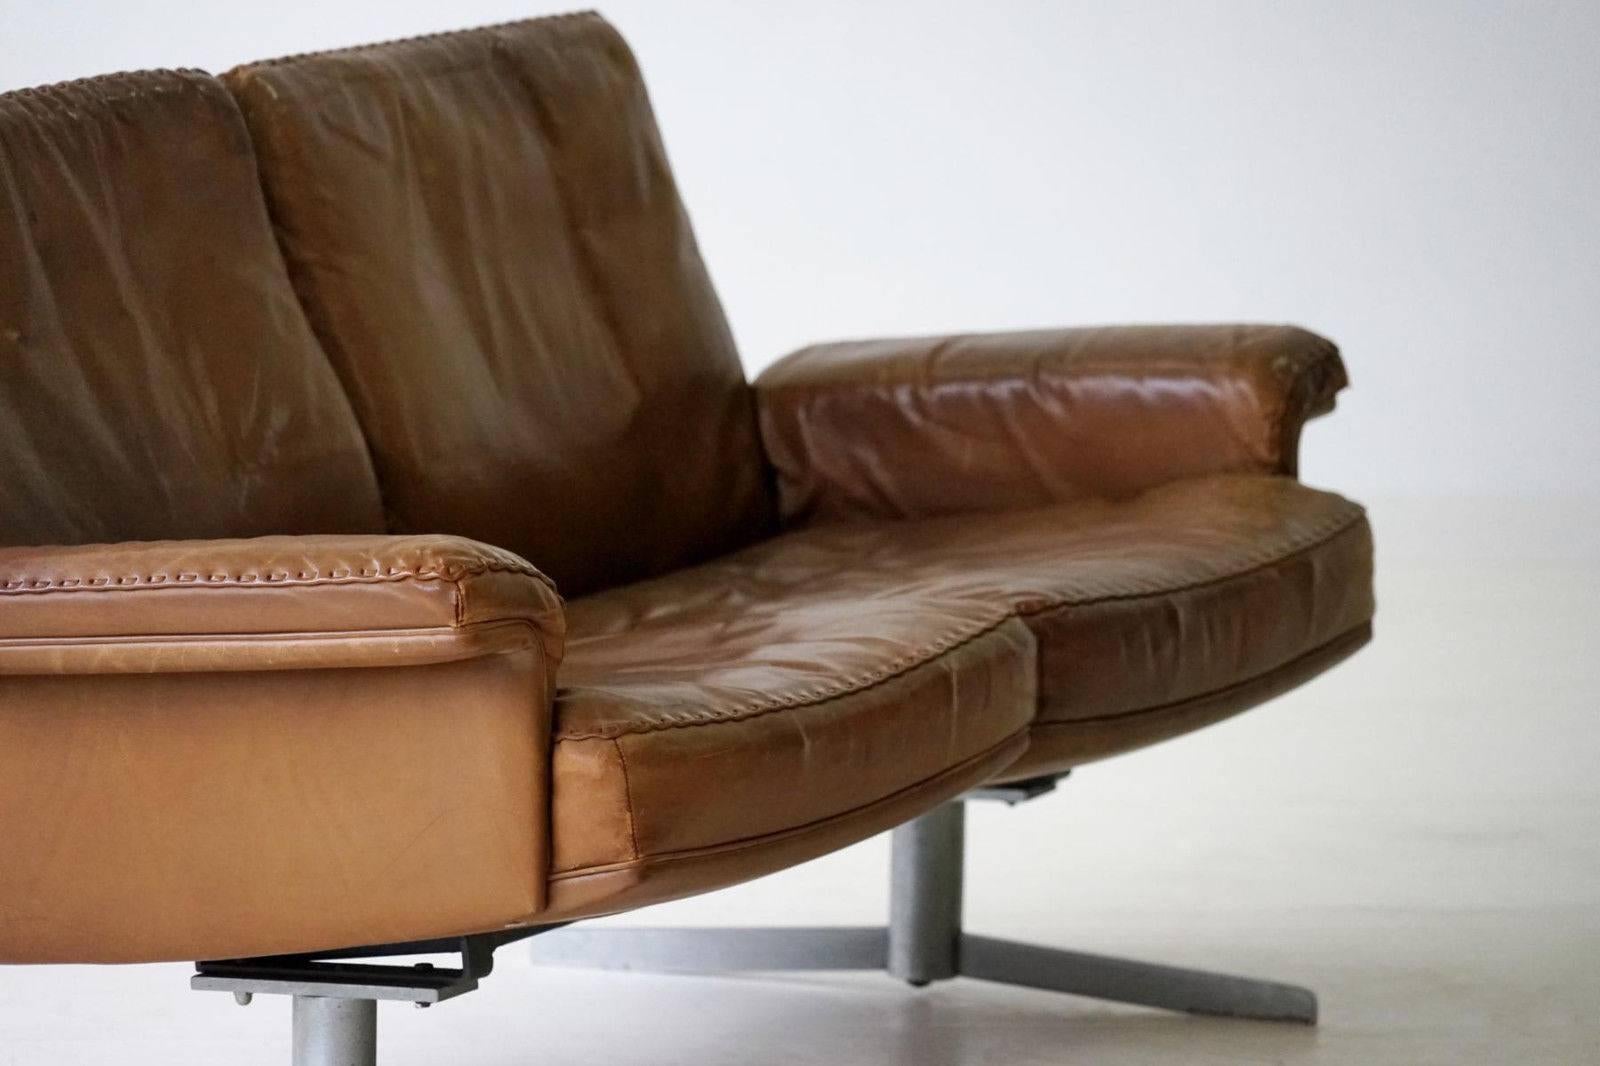 Seating set consisting of two De Sede DS 31 two-seat sofa. Neck leather in brown. Very good used condition with age-typical nice patina on the leather. The DS-31 model series is one of the classics of De Sede. Here, design, craftsmanship and leather